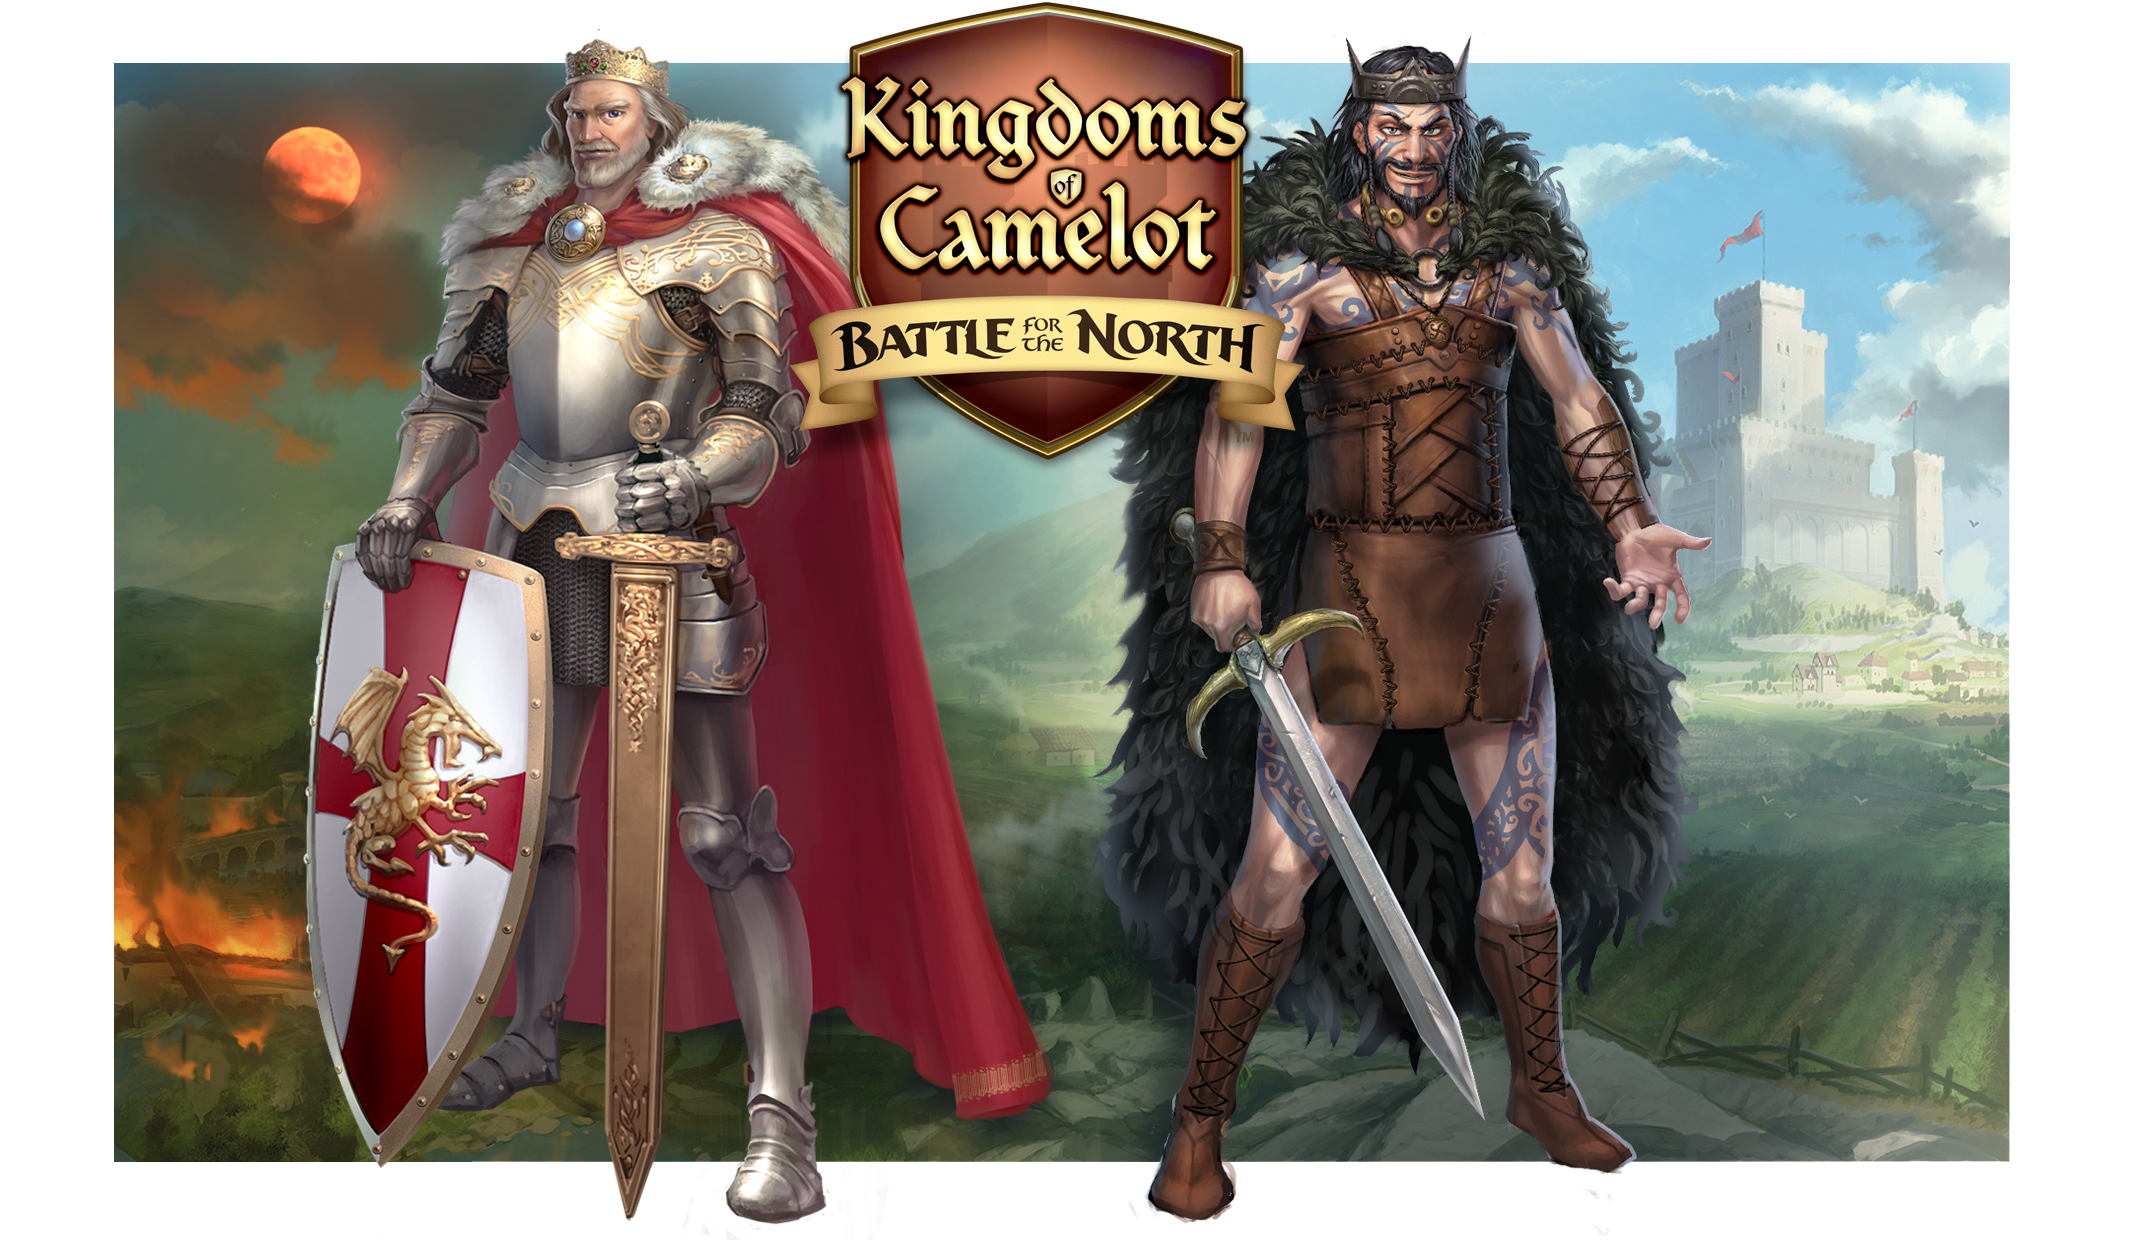 Kingdoms Of Camelot: Battle For The North HD wallpapers, Desktop wallpaper - most viewed